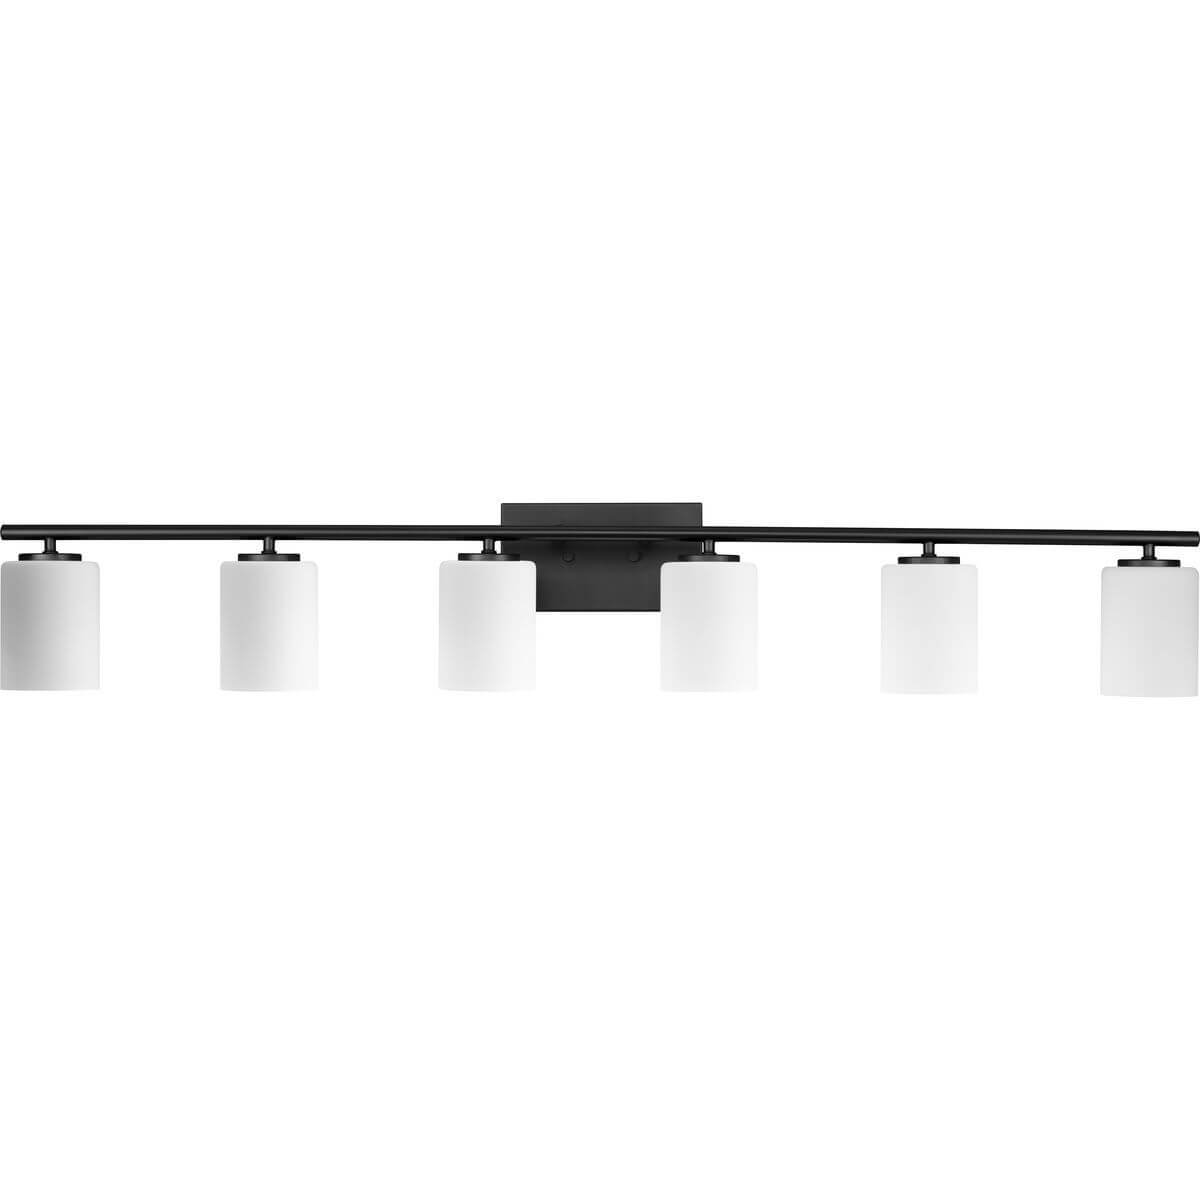 Progress Lighting Replay 6 Light 48 inch Bath Vanity Light in Textured Black with Etched White Glass P300385-031